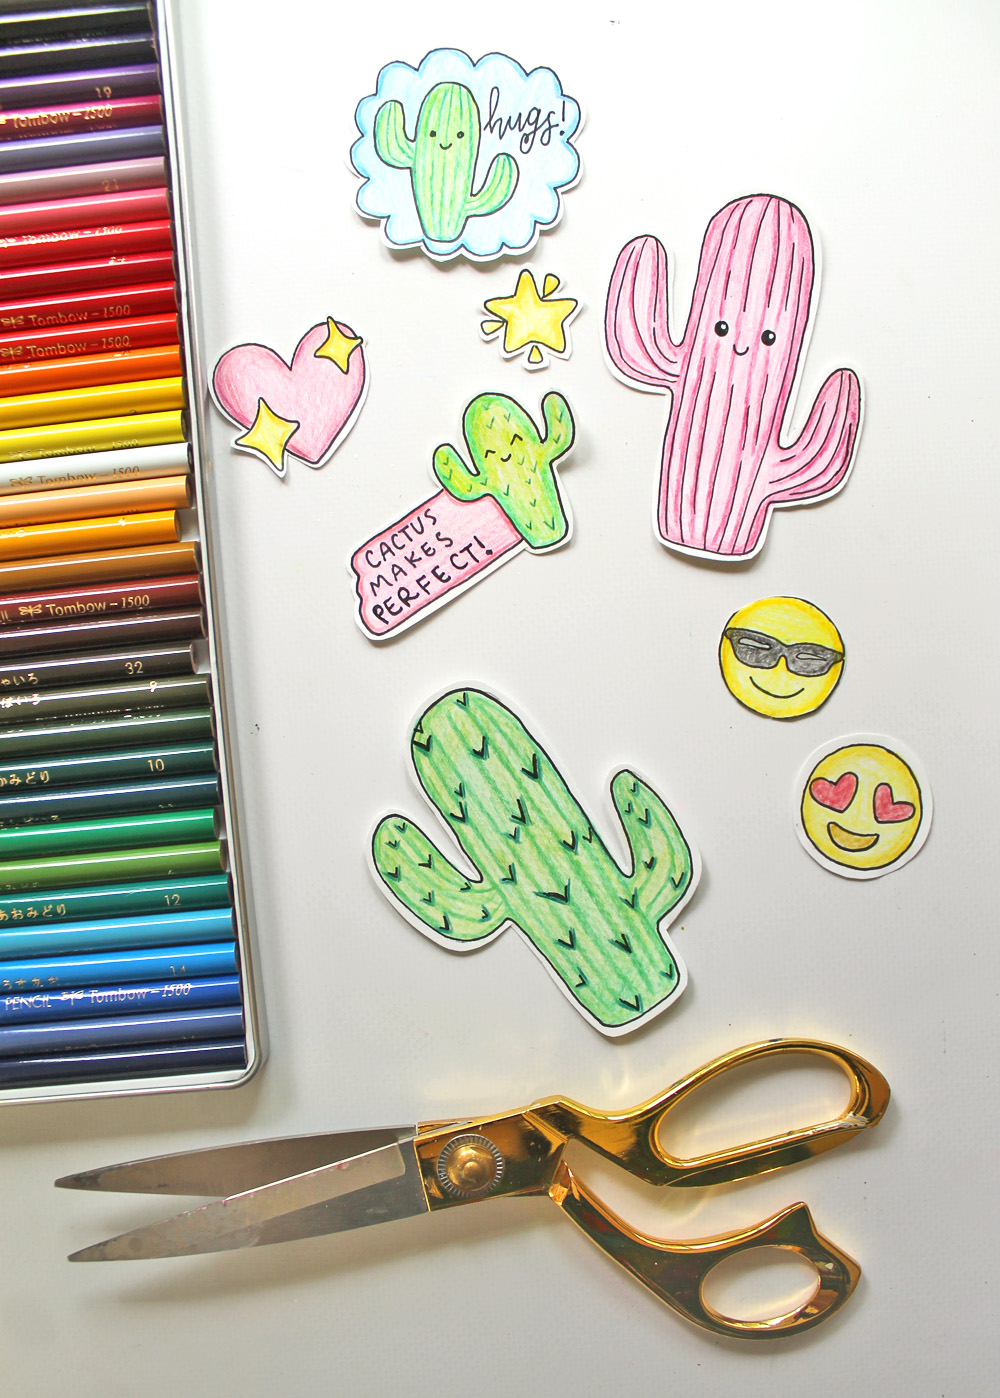 5 easy and smart ways to make homemade stickers on your own